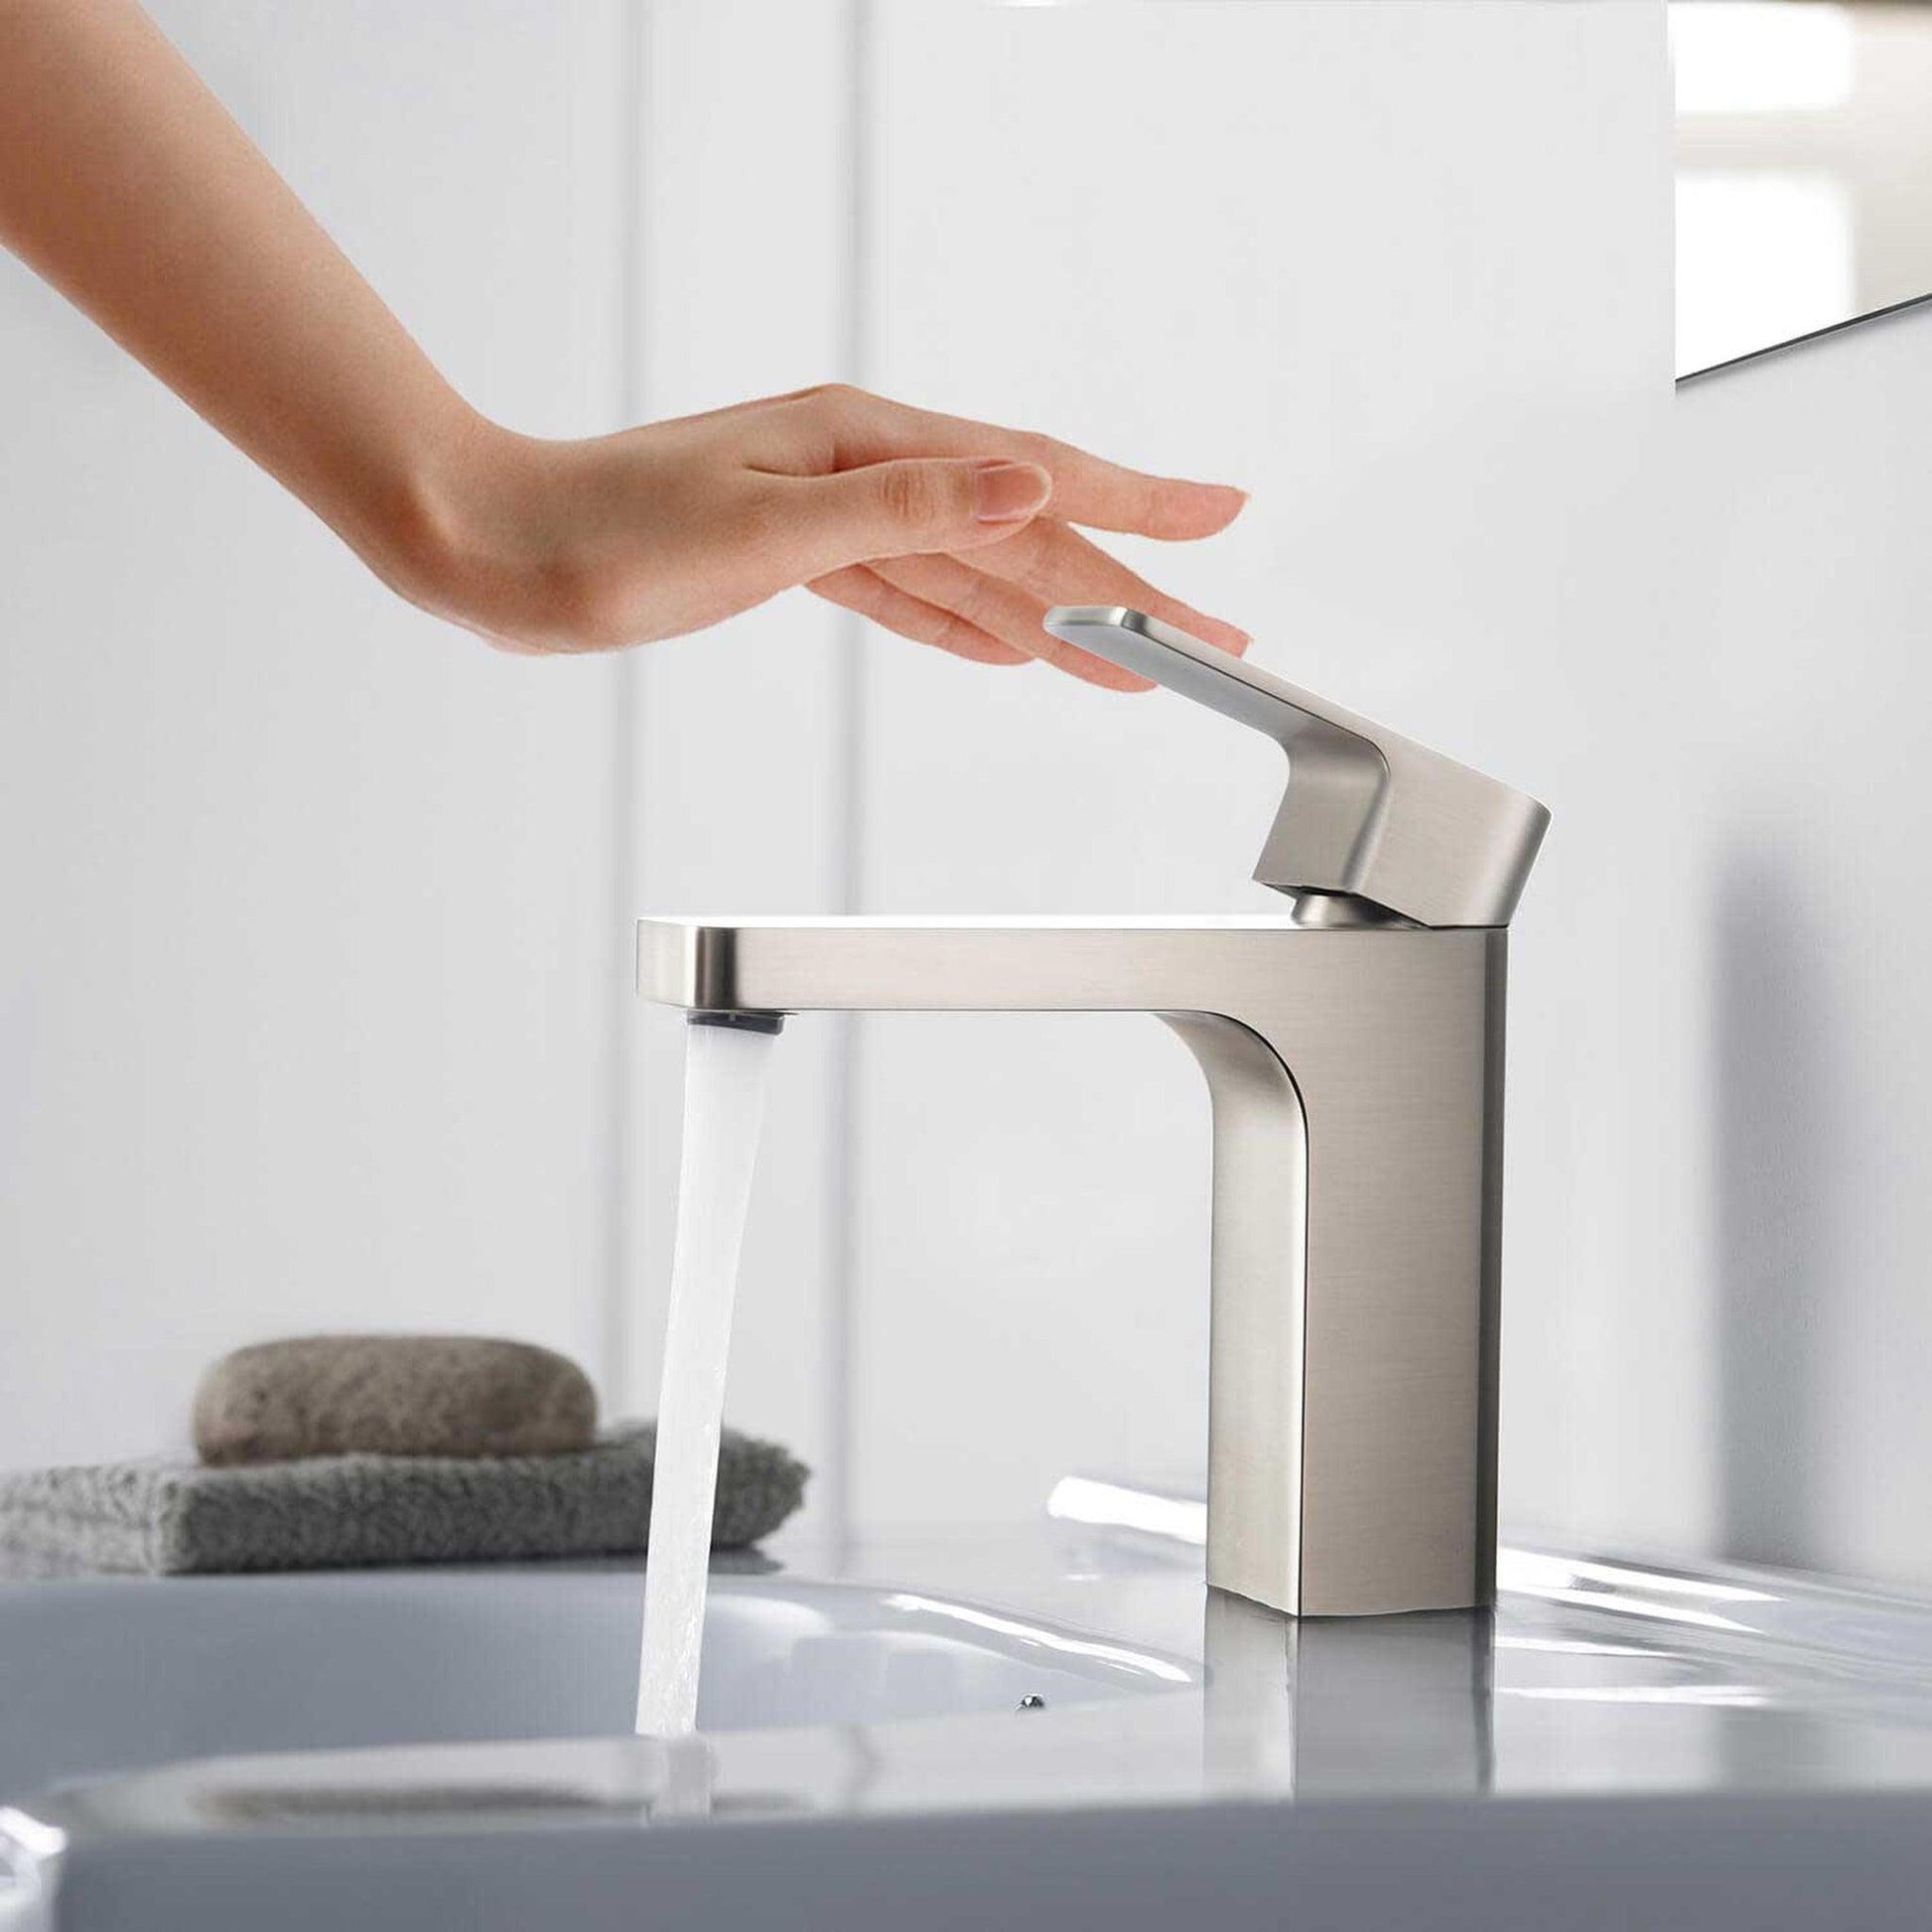 KIBI Blaze Single Handle Brushed Nickel Solid Brass Bathroom Sink Faucet With Pop-Up Drain Stopper Small Cover With Overflow